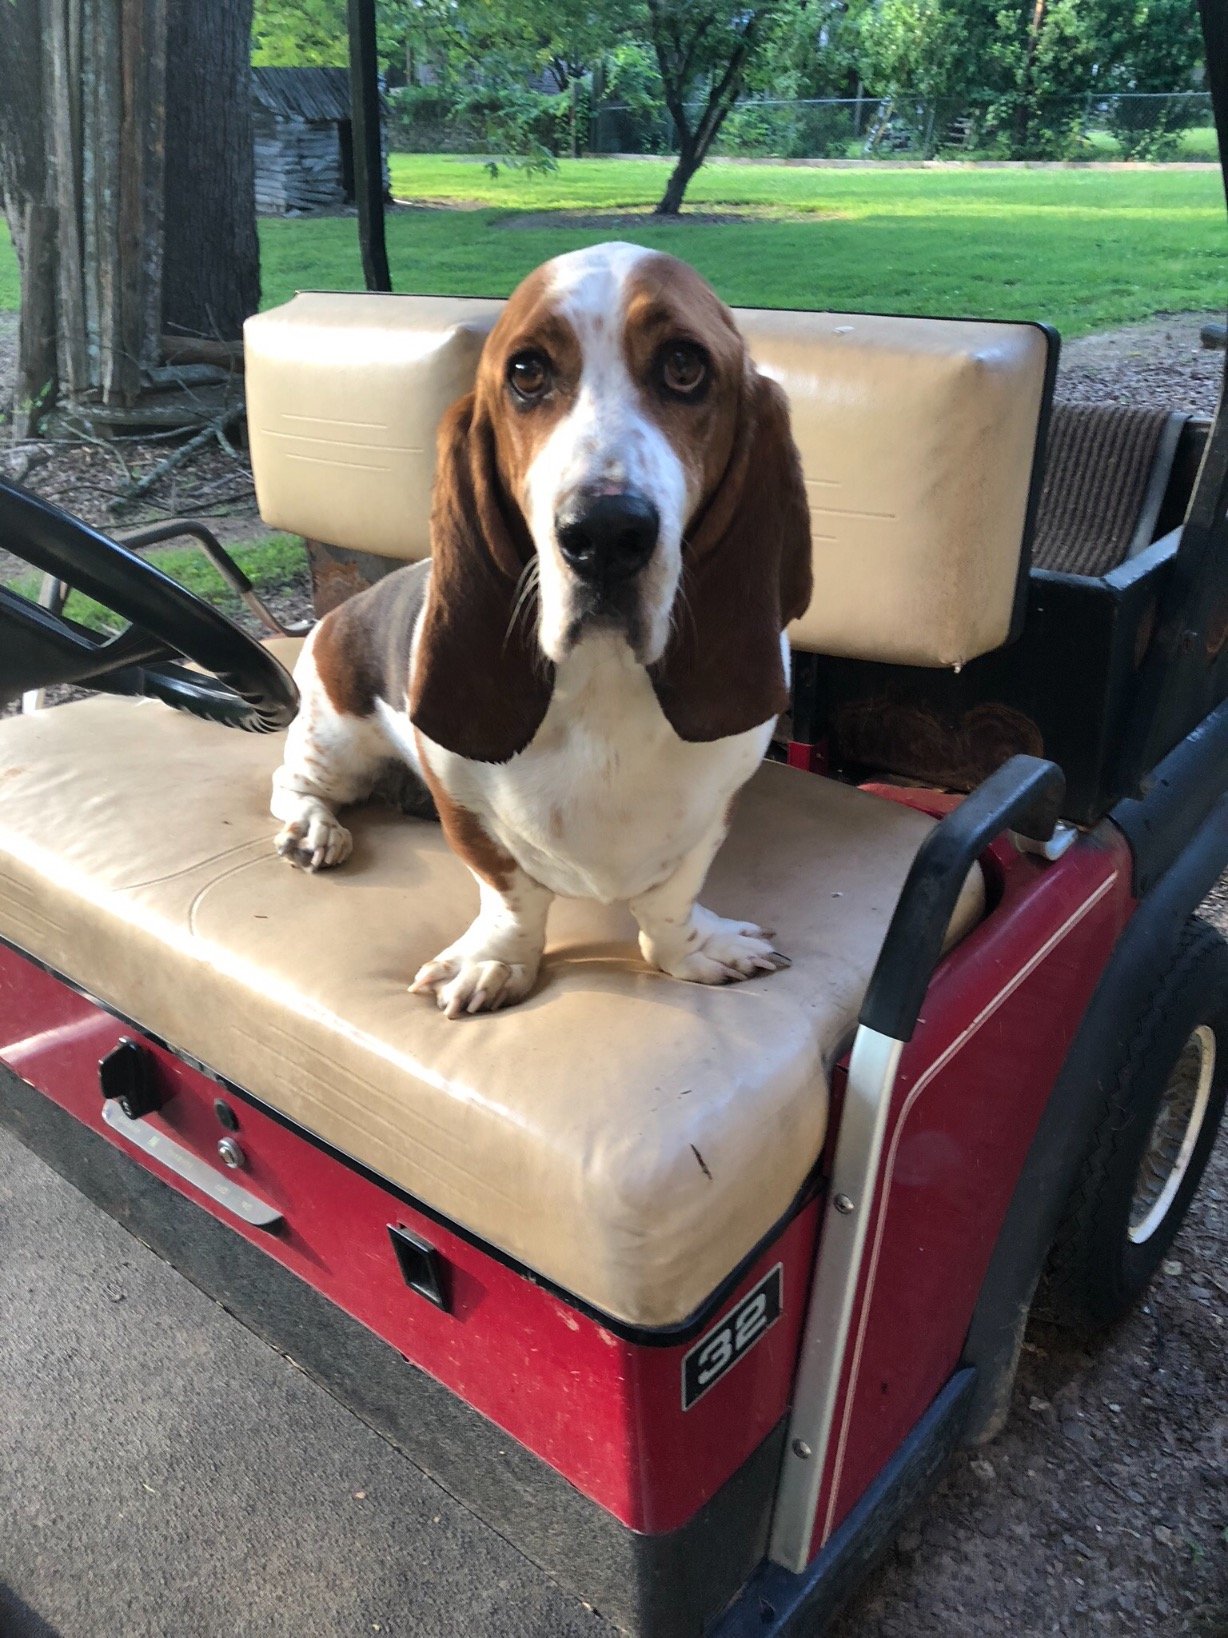 Basset Hound calls the great state of Tennessee now Texas home! I help my human get through life with a healthy balance of faith, fun and unconditional love.